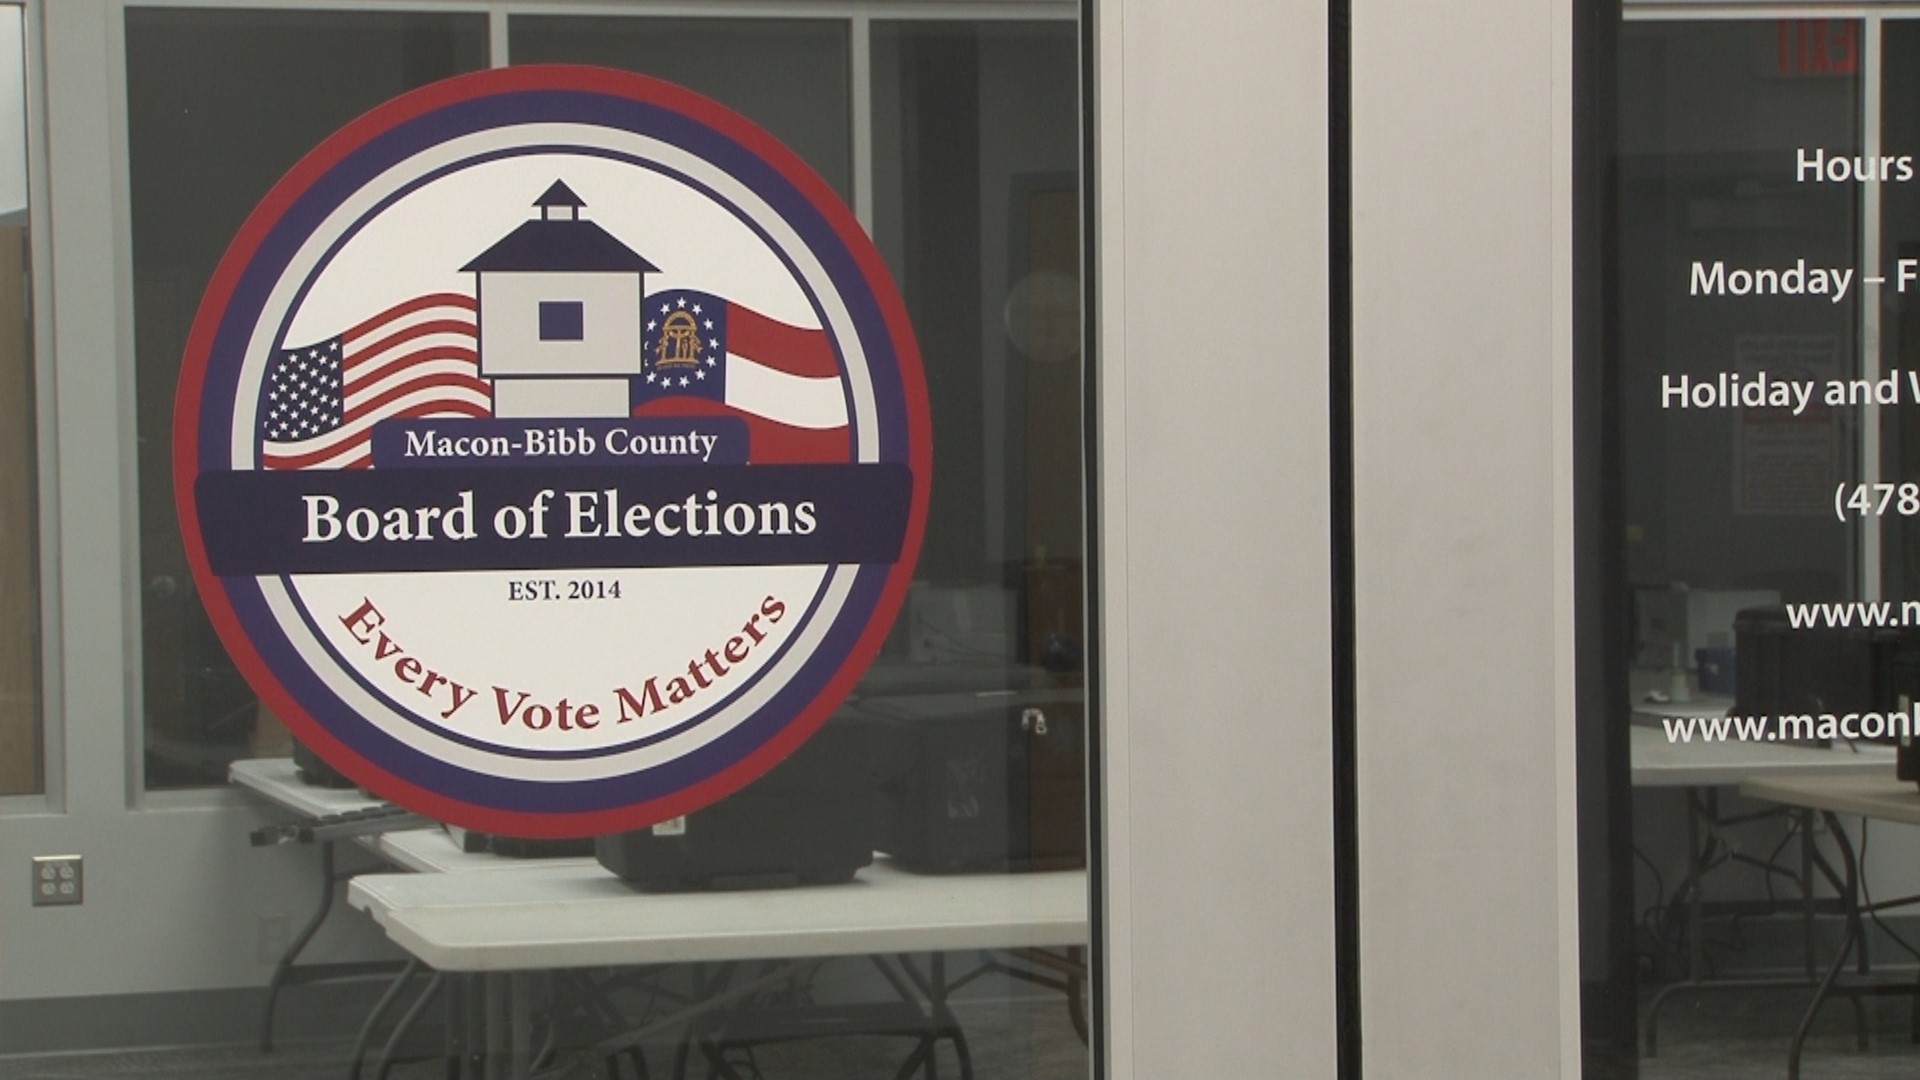 They were notified Wednesday evening that the Macon-Bibb County Board of Elections was challenging their qualifications.